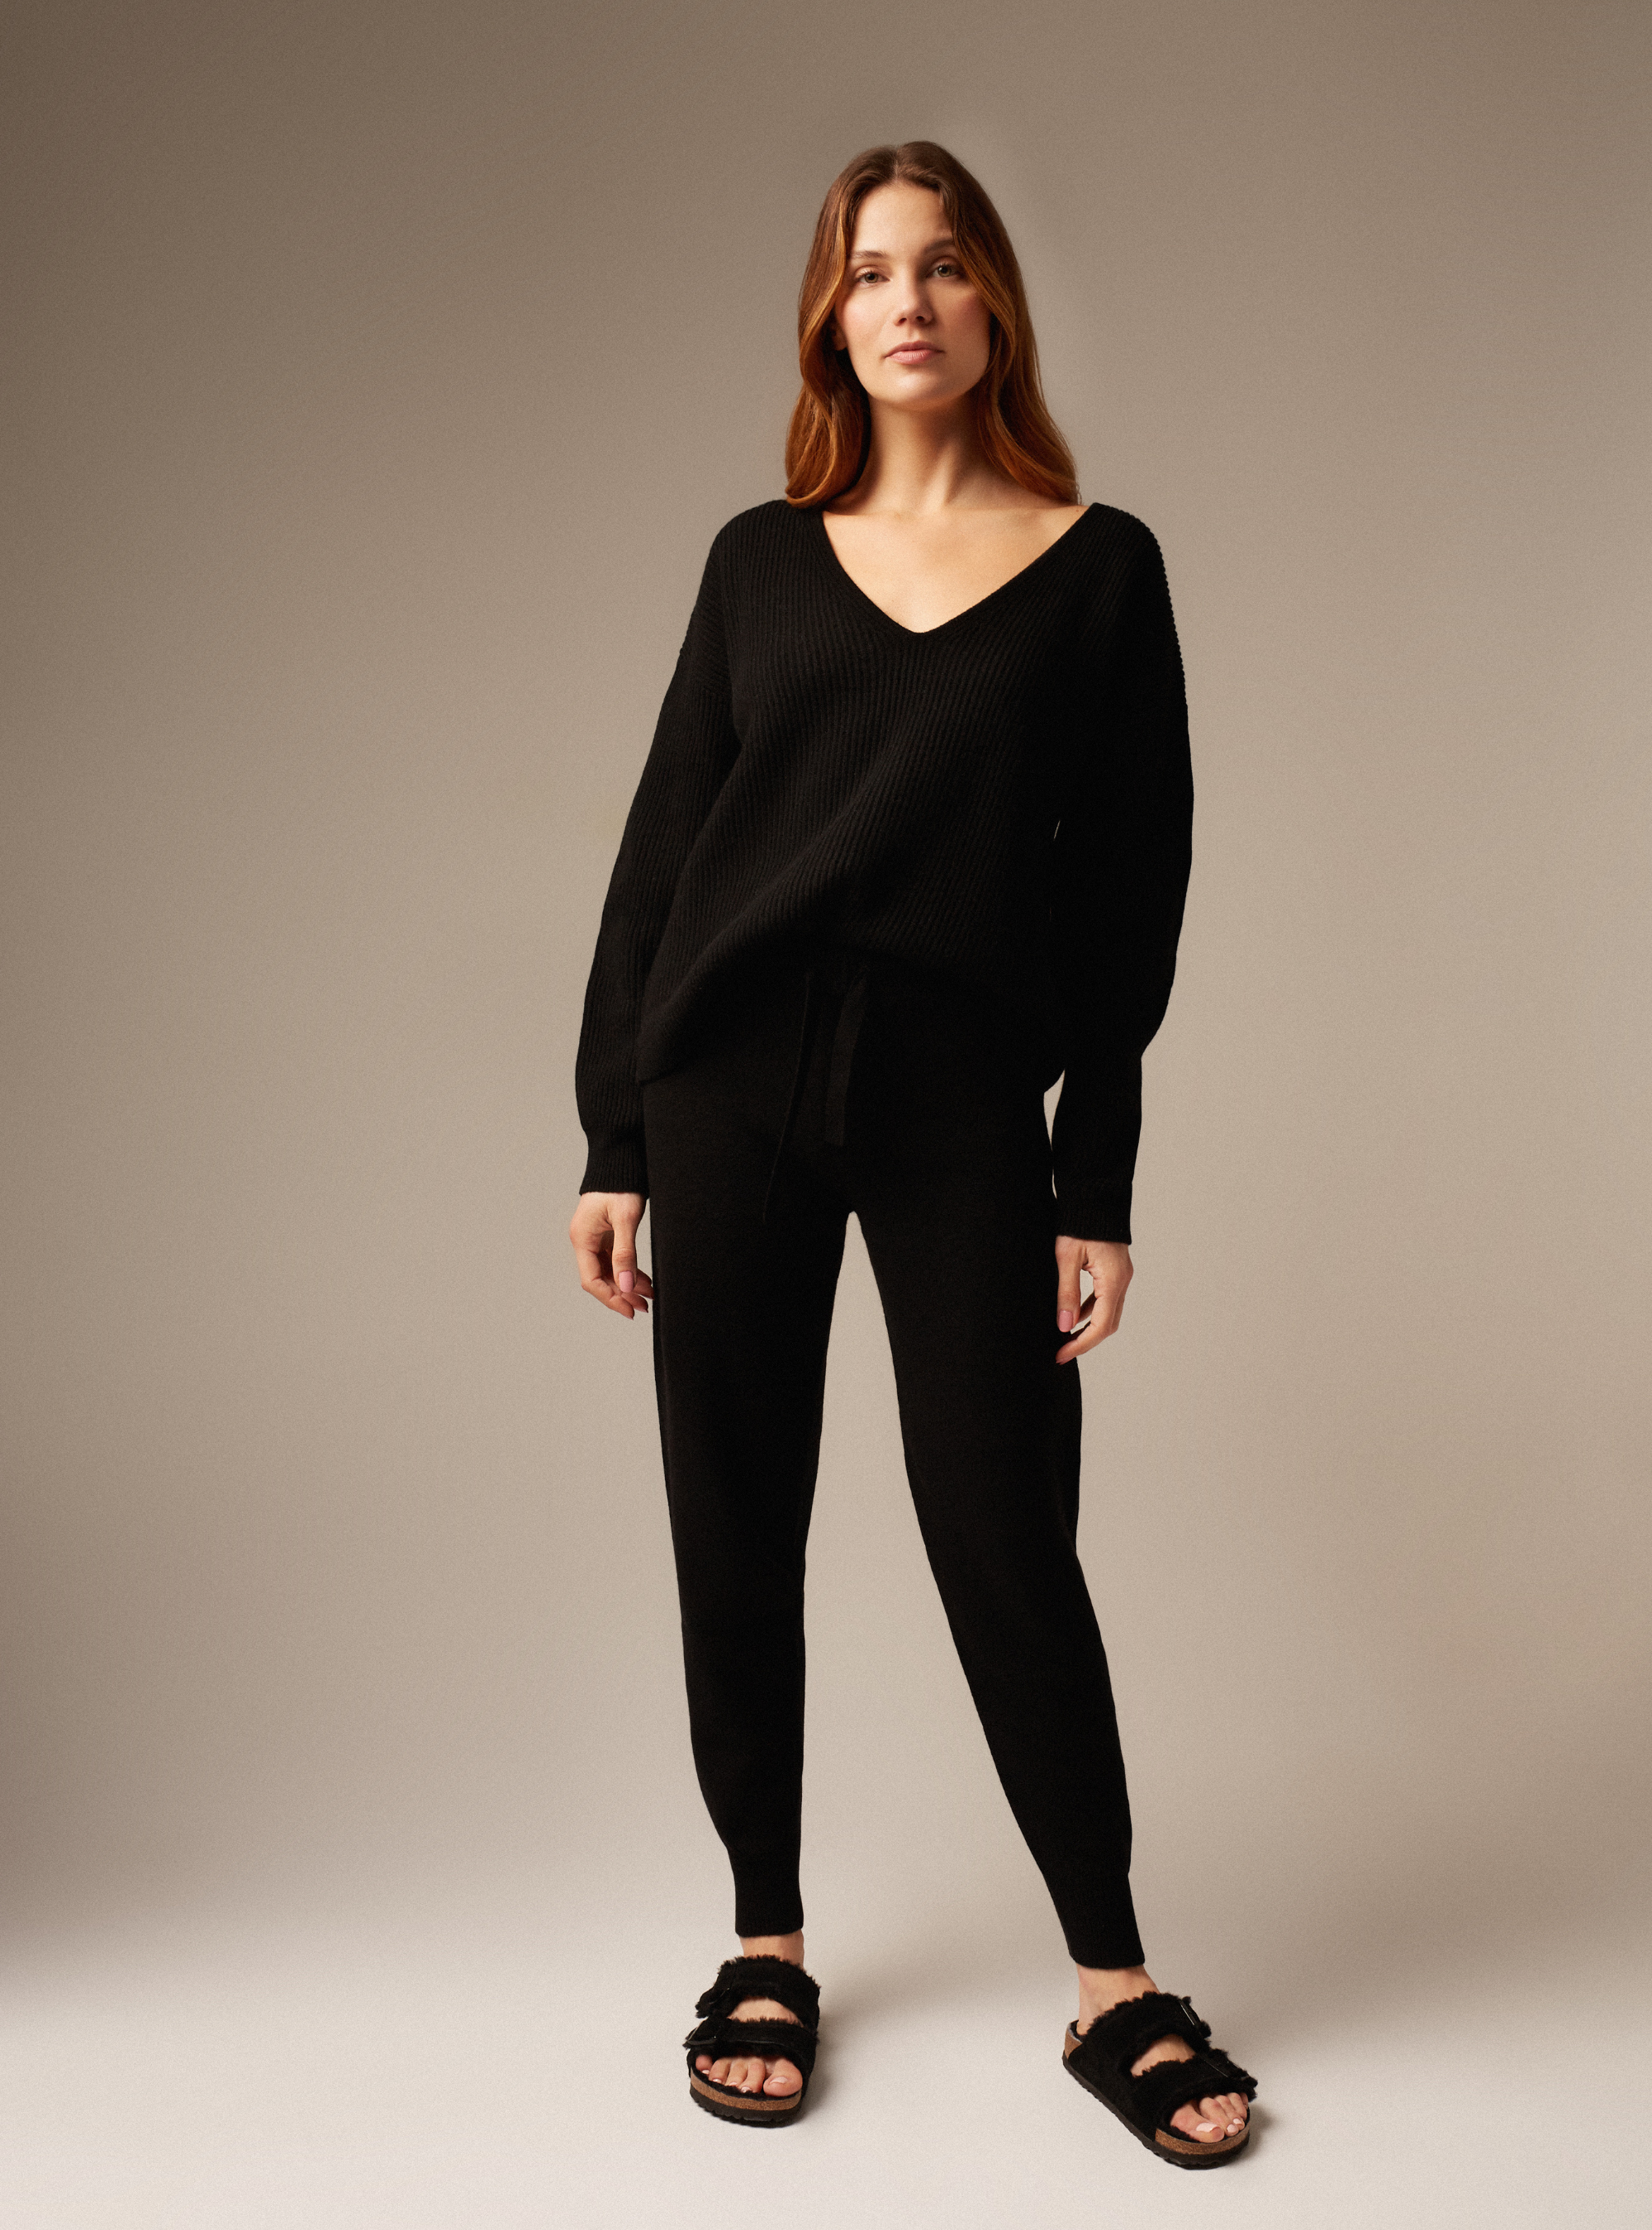 Cashmere women's joggers in Black 